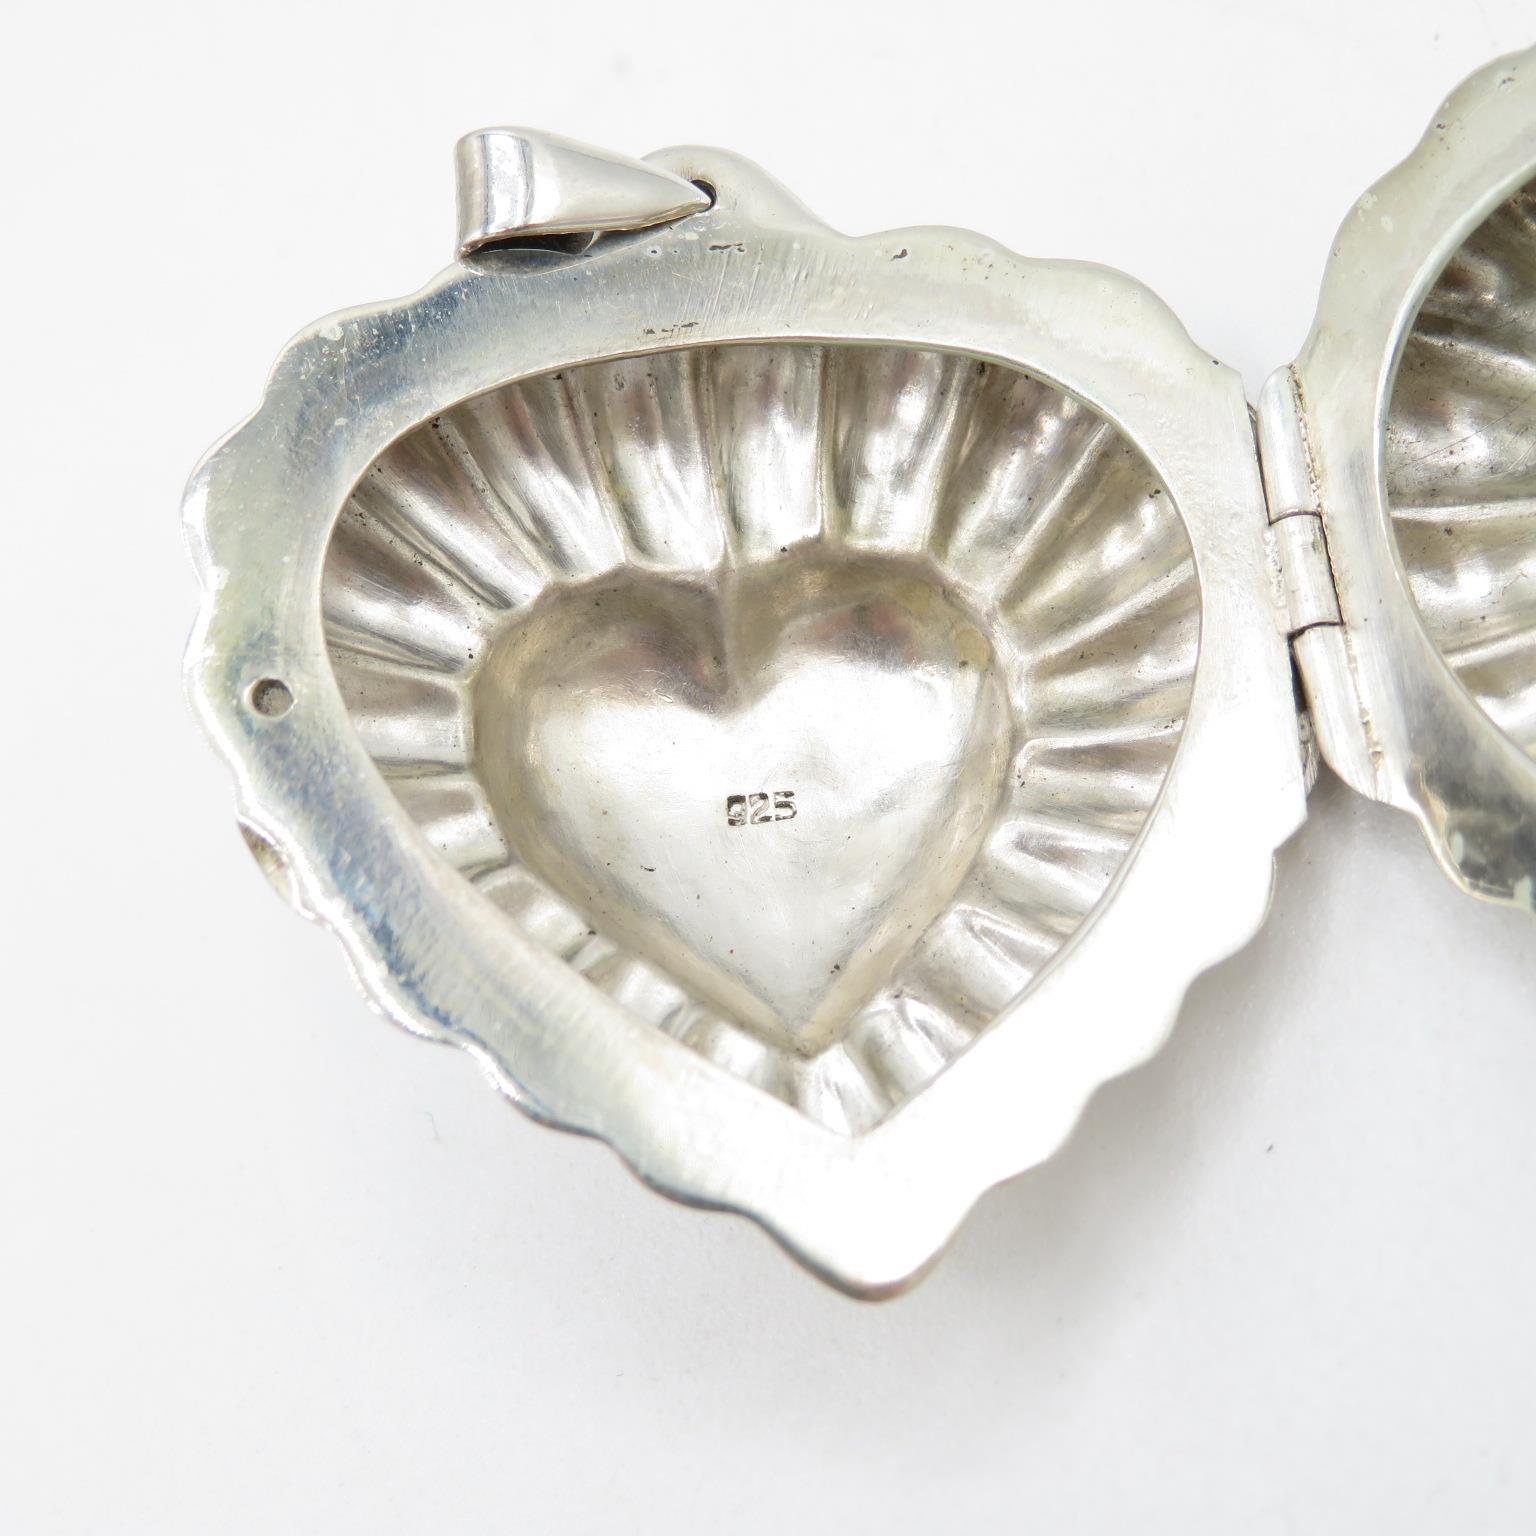 Heart shaped locket Vesta with foliate design in 925 HM Sterling Silver in excellent condition hinge - Image 4 of 5